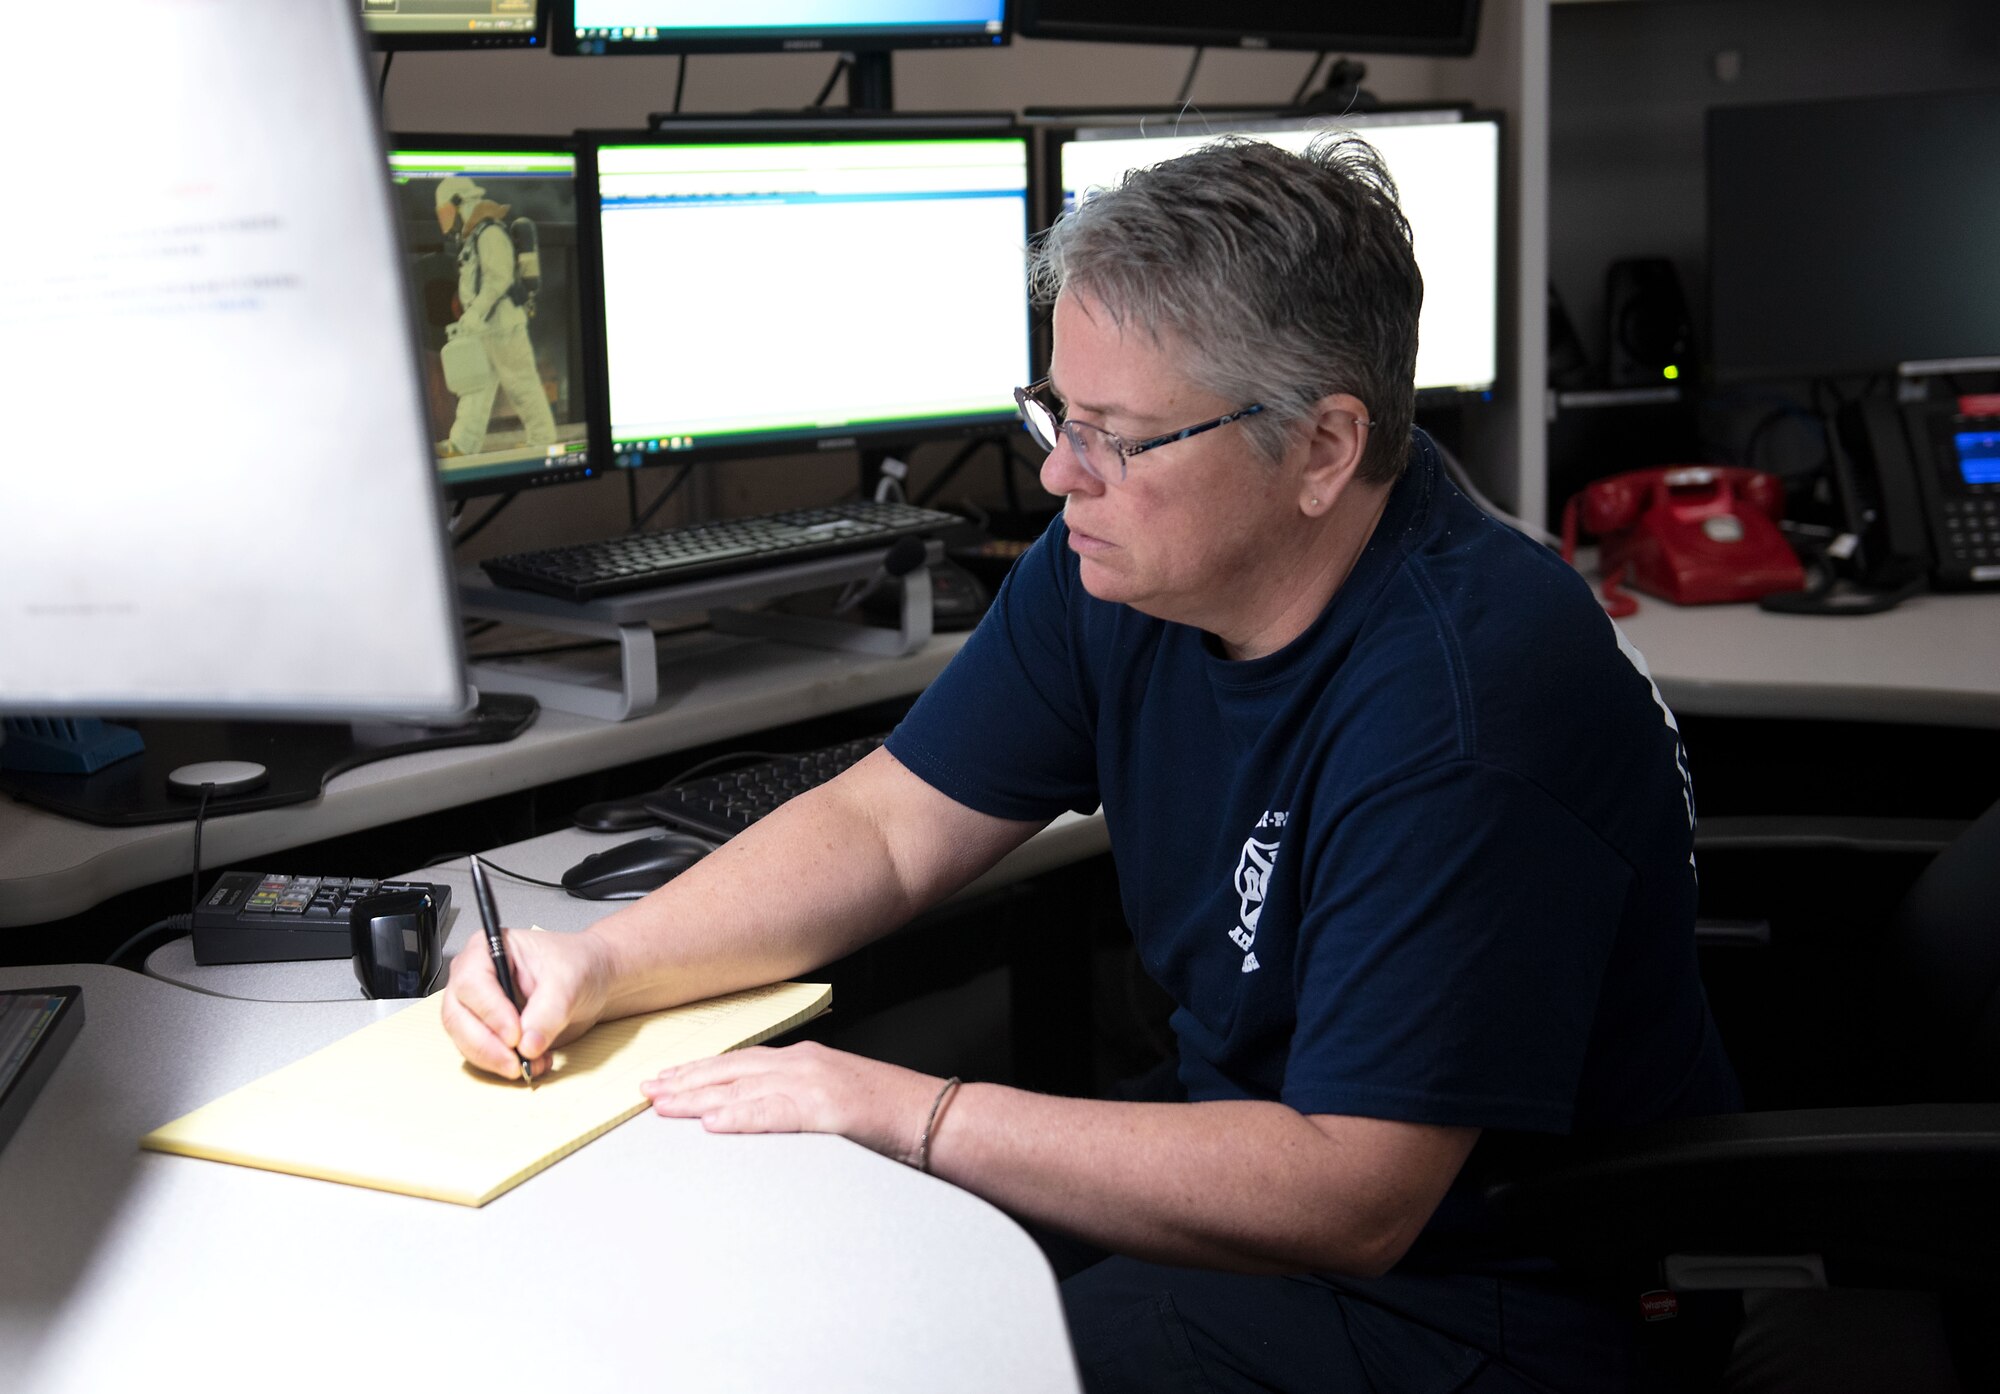 A WPAFB dispatcher takes notes during an emergency call.